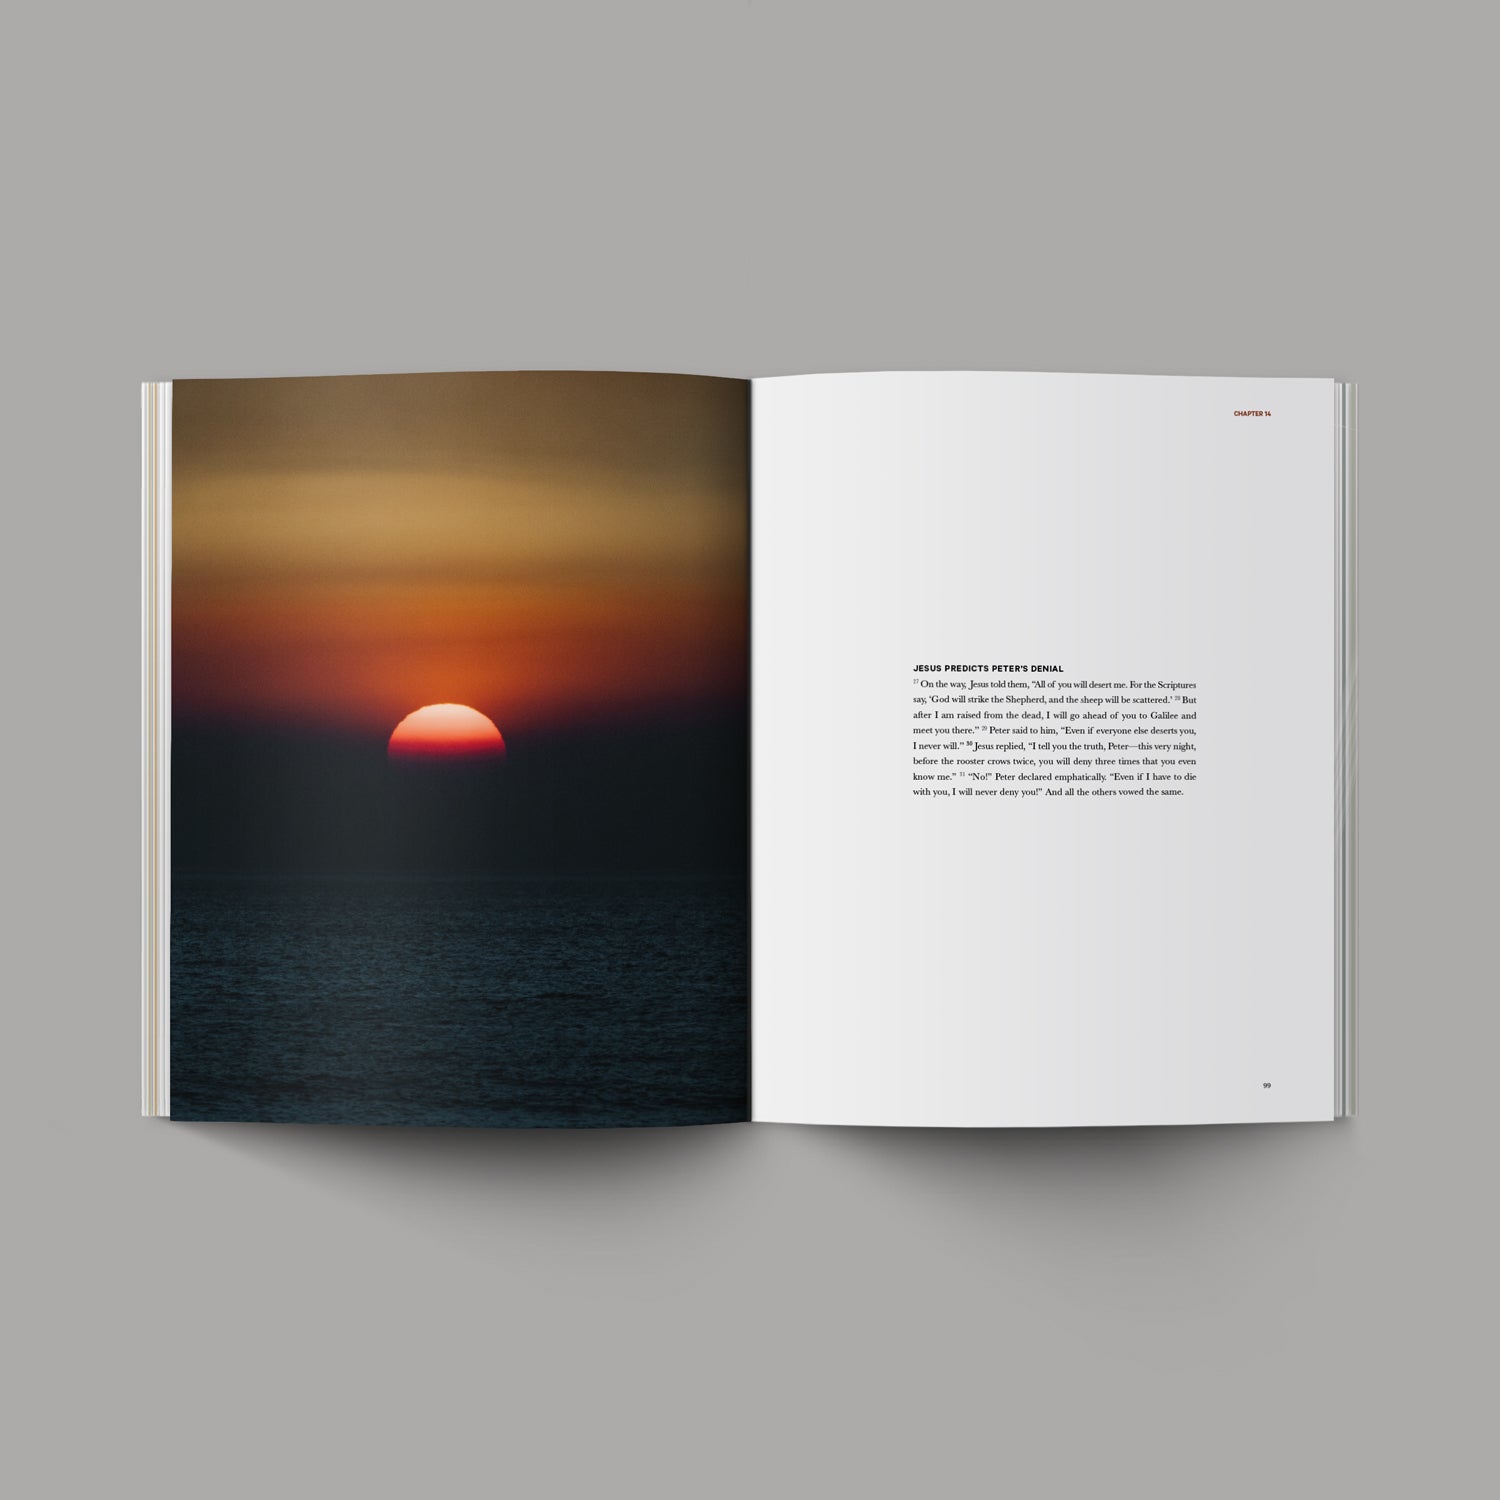 Book of Mark open, sunset image